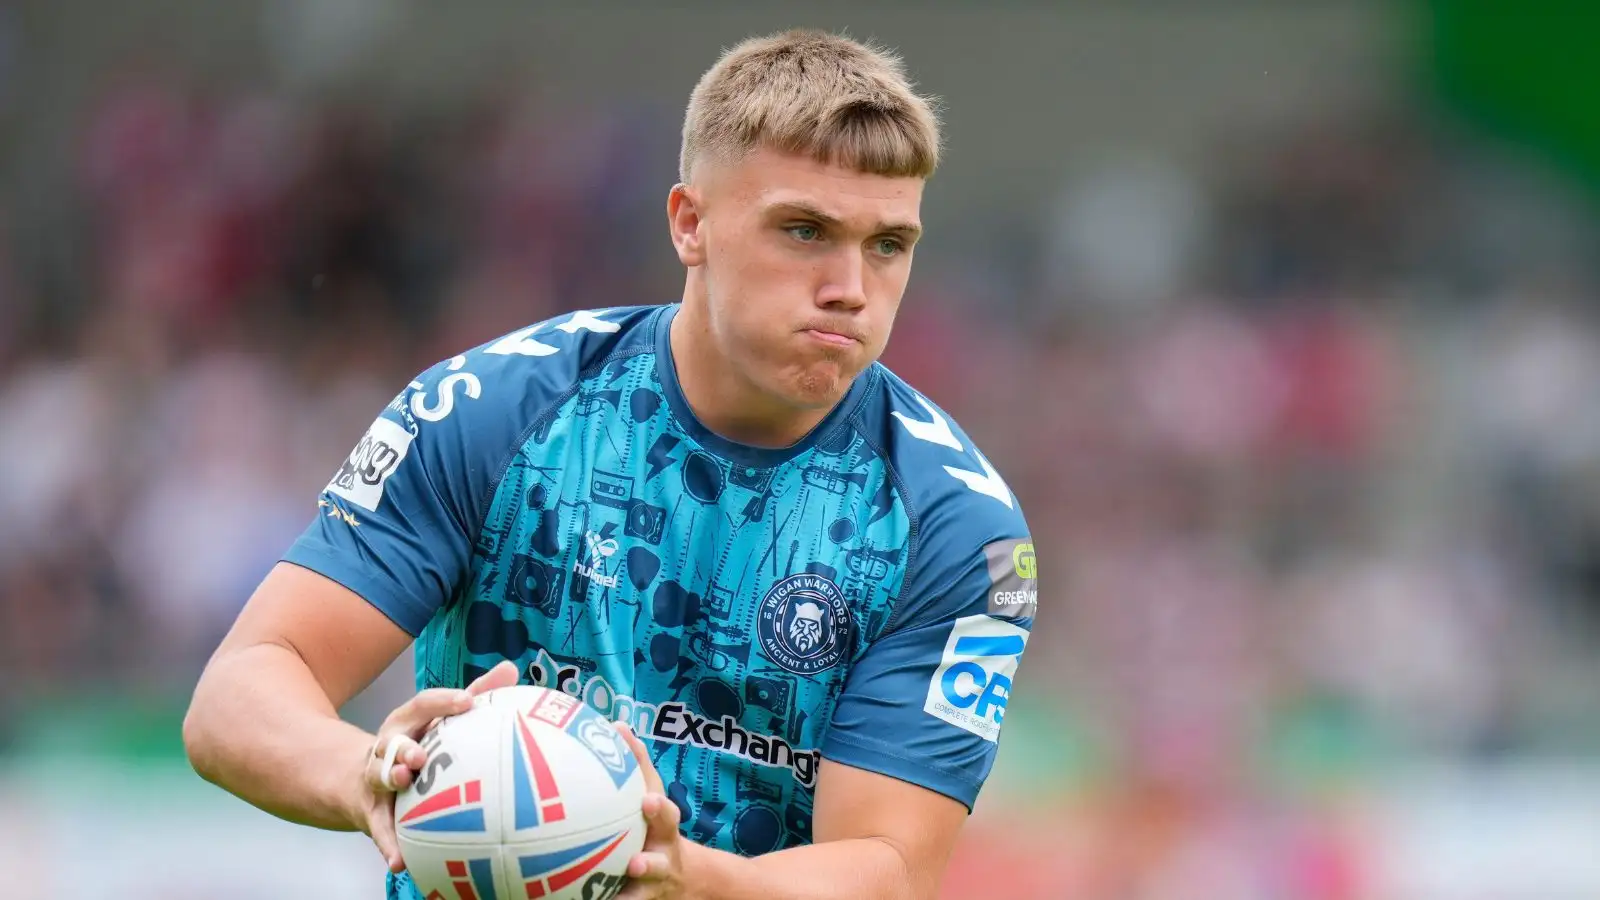 Wigan Warriors promising prop praised: ‘He’s going to play a lot of games for this club’